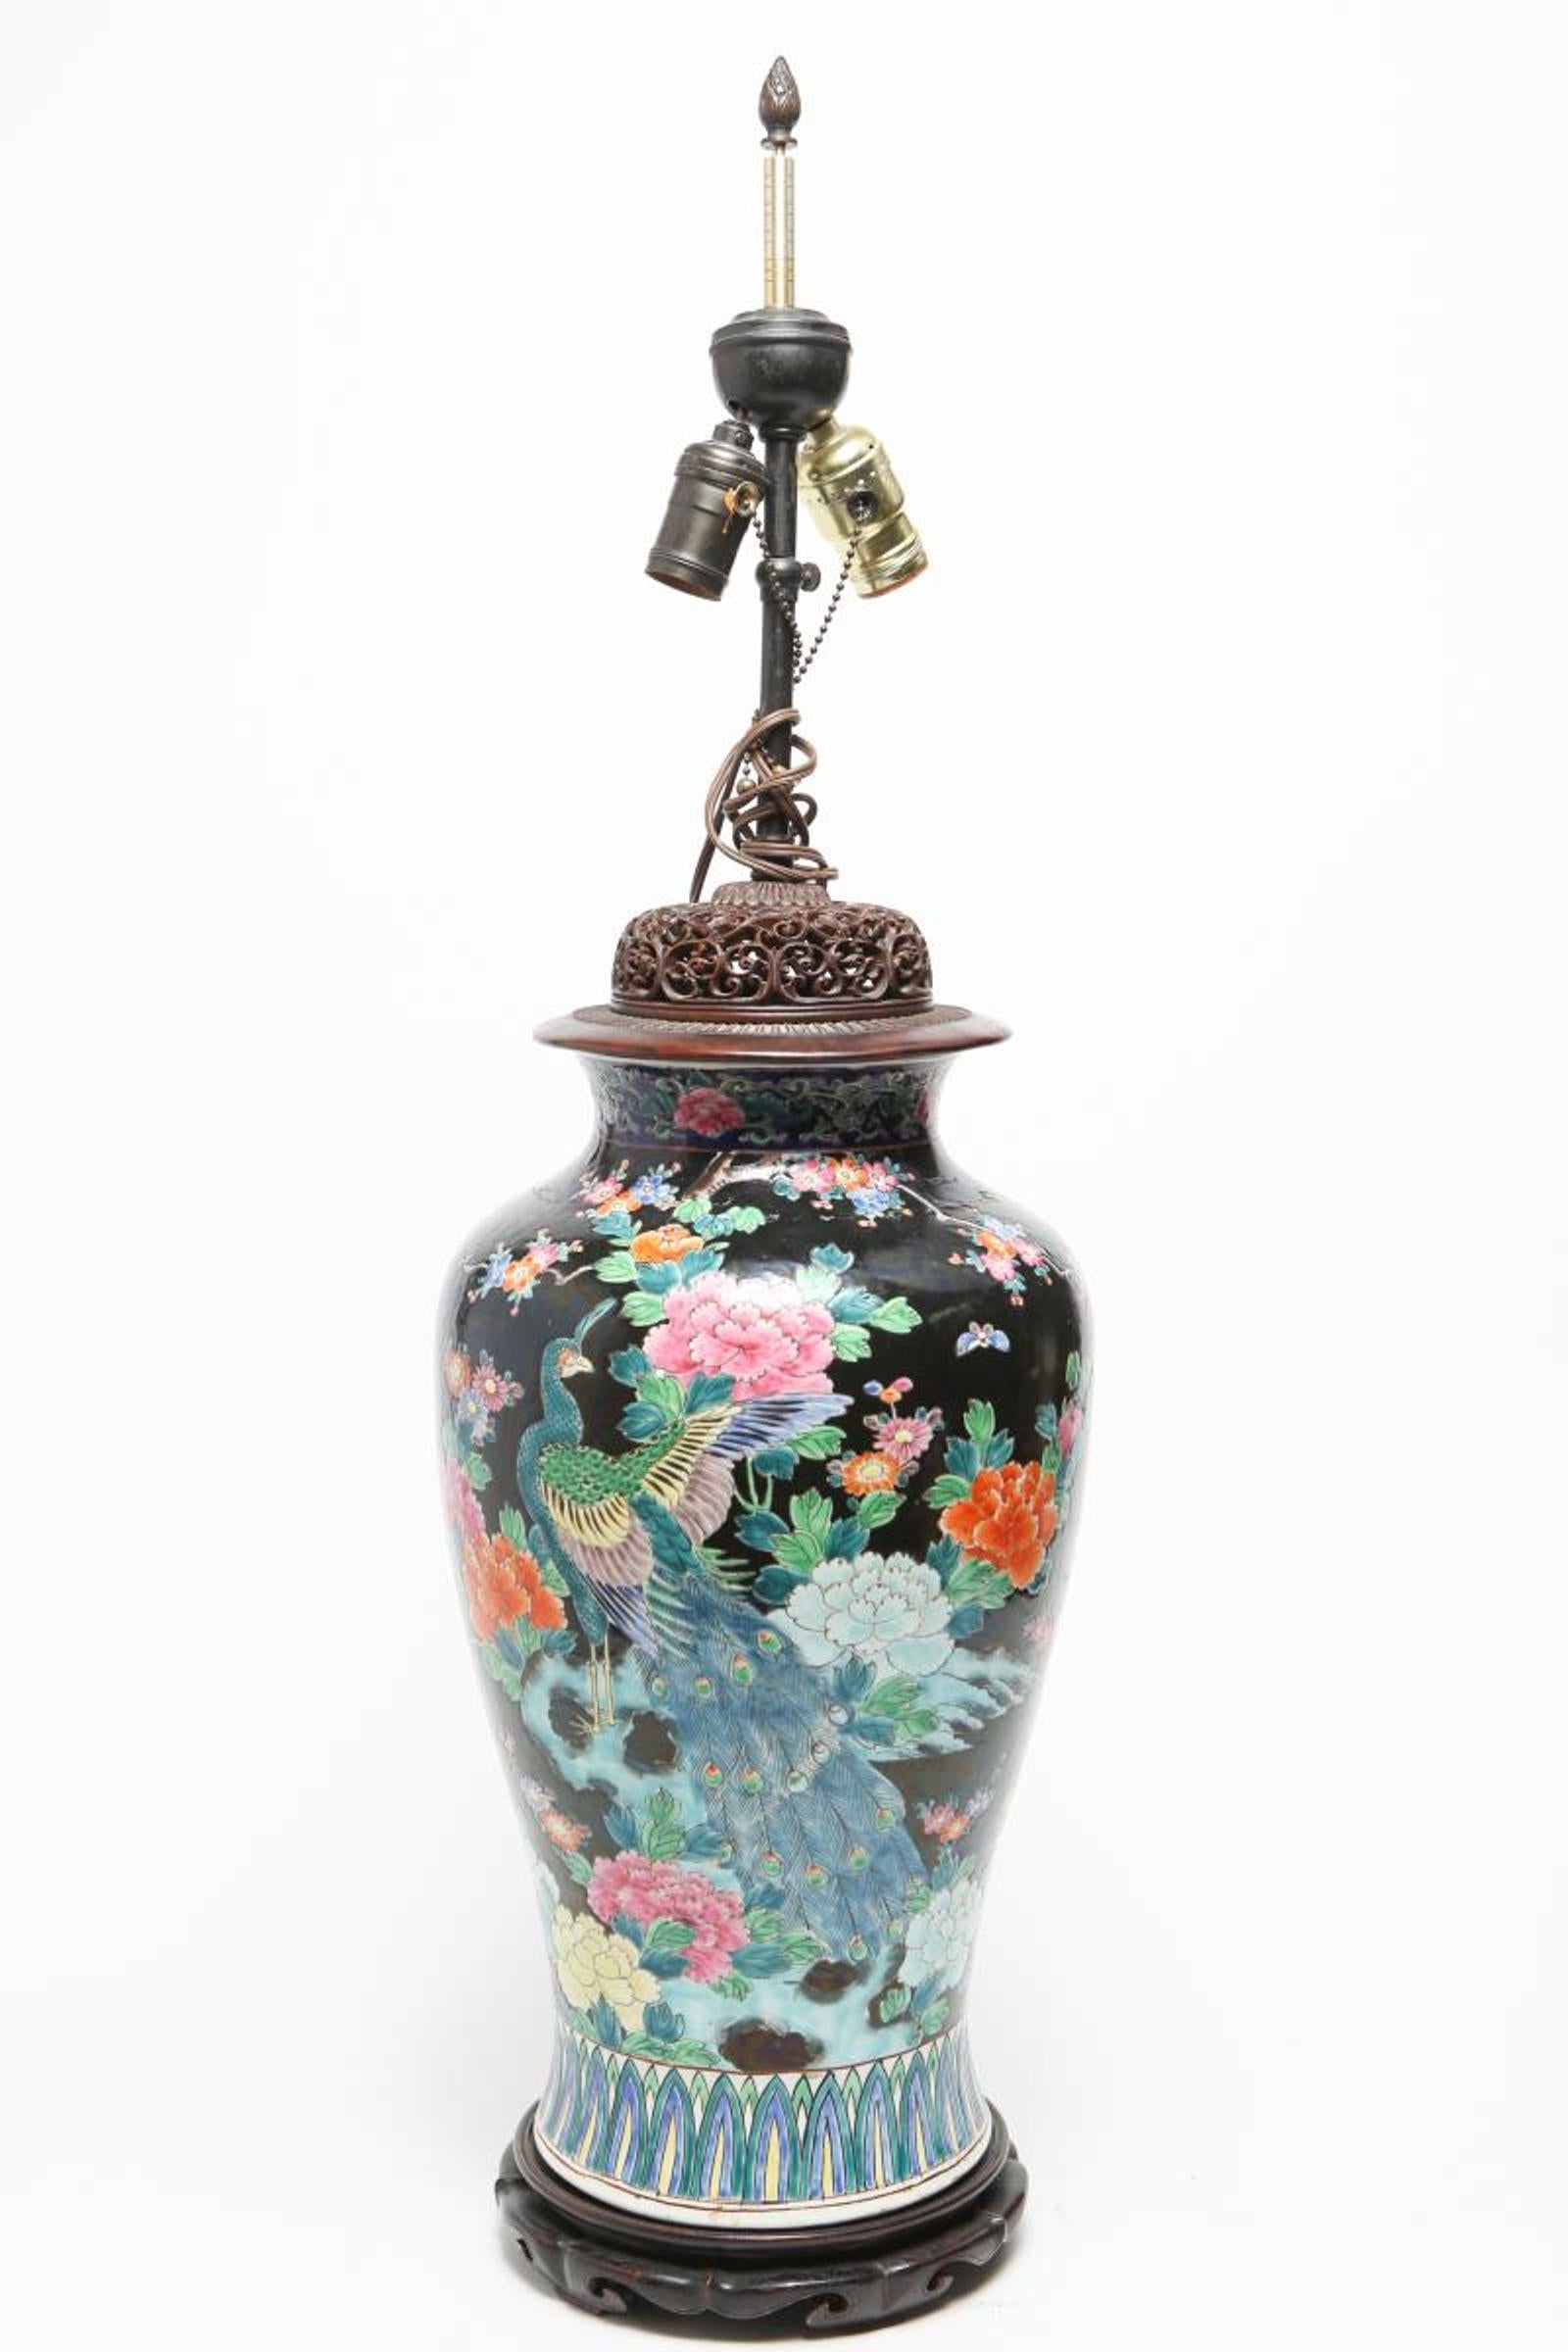 Chinese Famille Noire porcelain balluster jar in floral motif with delicately enameled peonies, camelias, bamboo and phoenix, and a border of stylized stiff feathers, with a carved openwork wood cover. The piece is mounted as a table lamp, on an